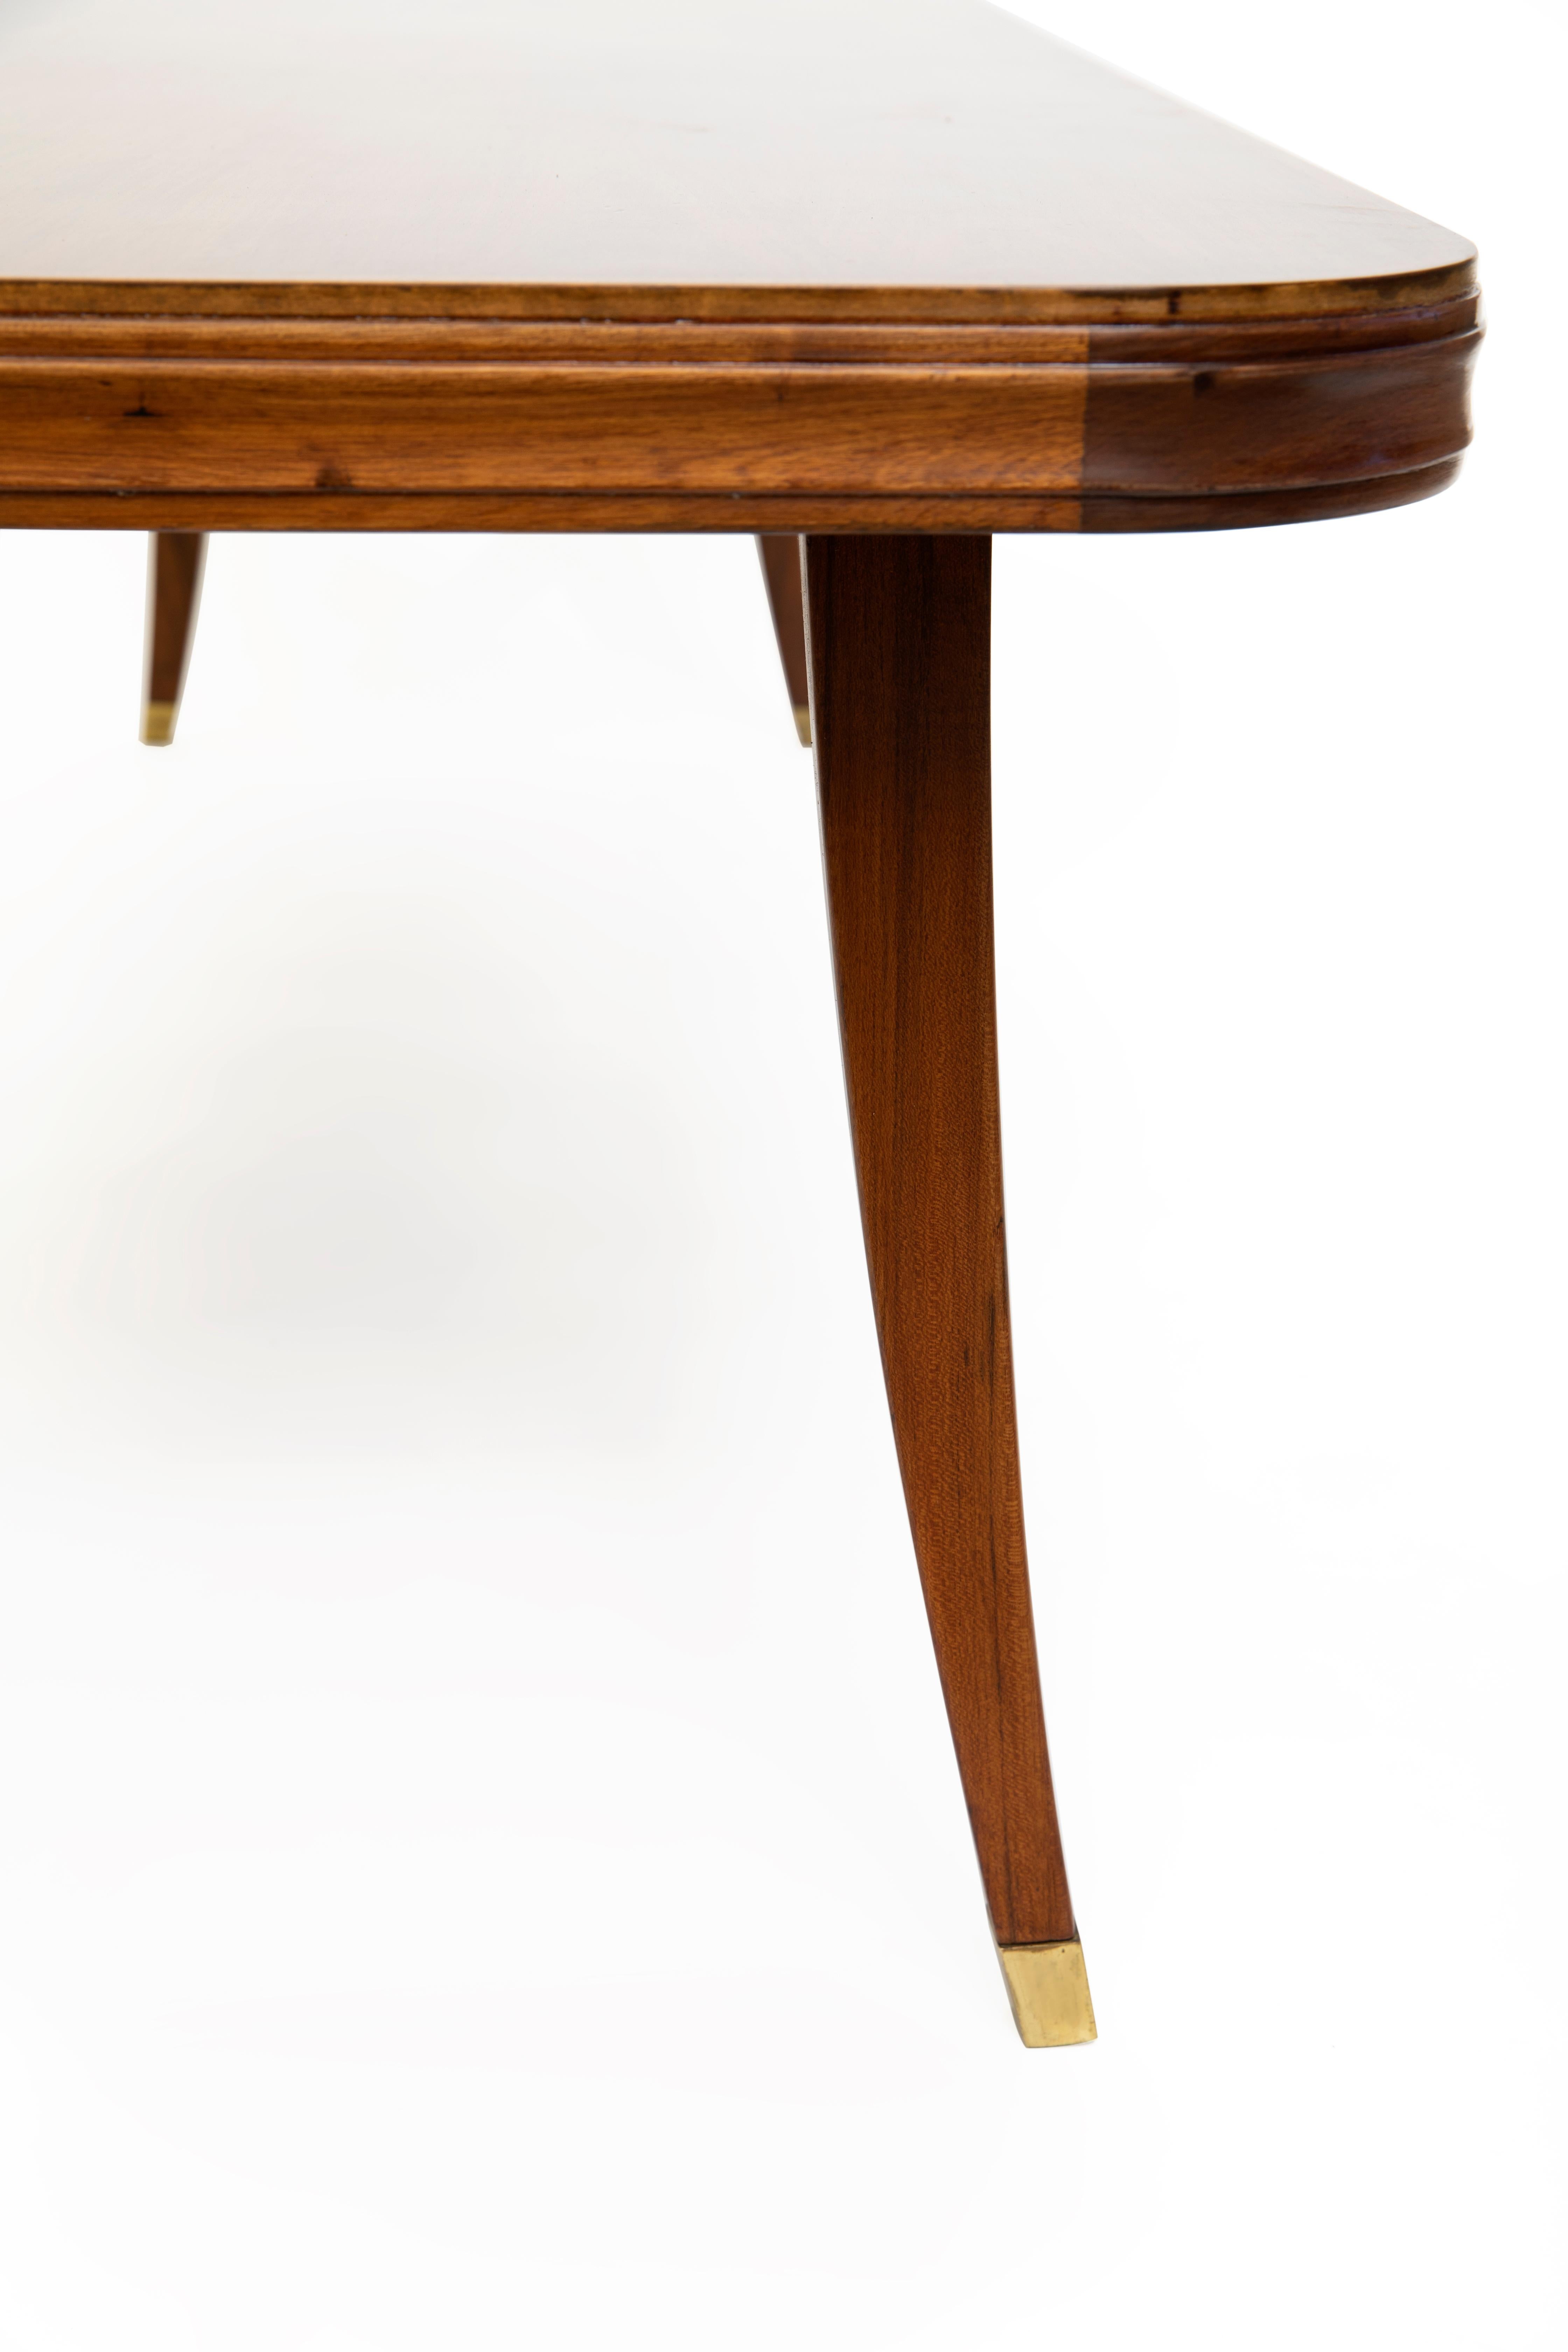 Mid-20th Century Pair of Wood and Bronze Low Tables by Comte, Argentina, Buenos Aires, circa 1940 For Sale